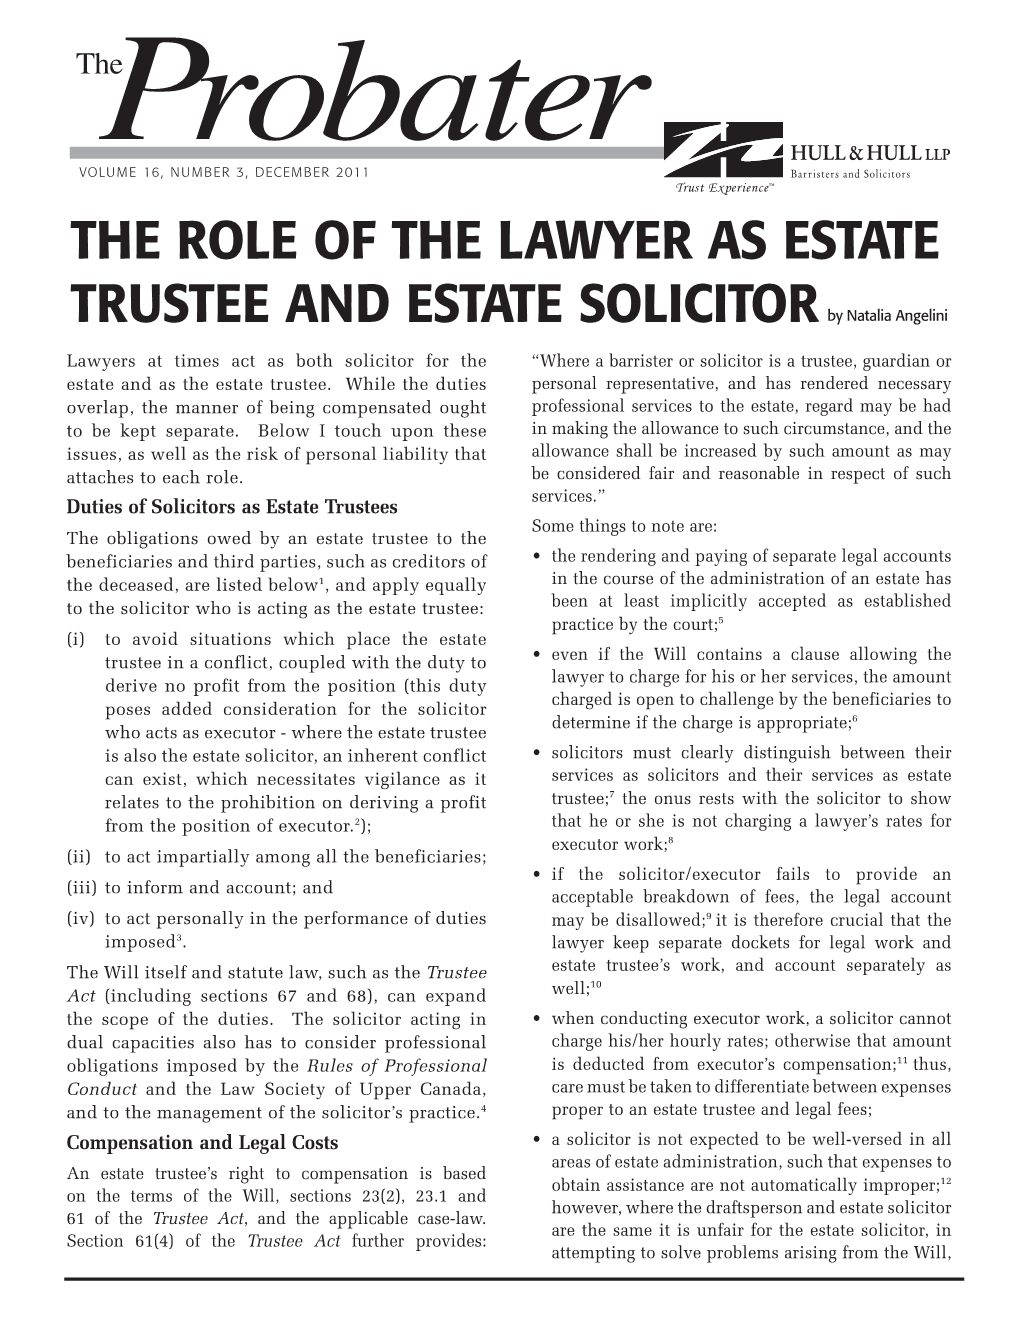 THE ROLE of the LAWYER AS ESTATE TRUSTEE and ESTATE SOLICITOR Continued from Front to Benefit from His Own Oversight – Legal Fees Have (Trustee Act, Section 60)